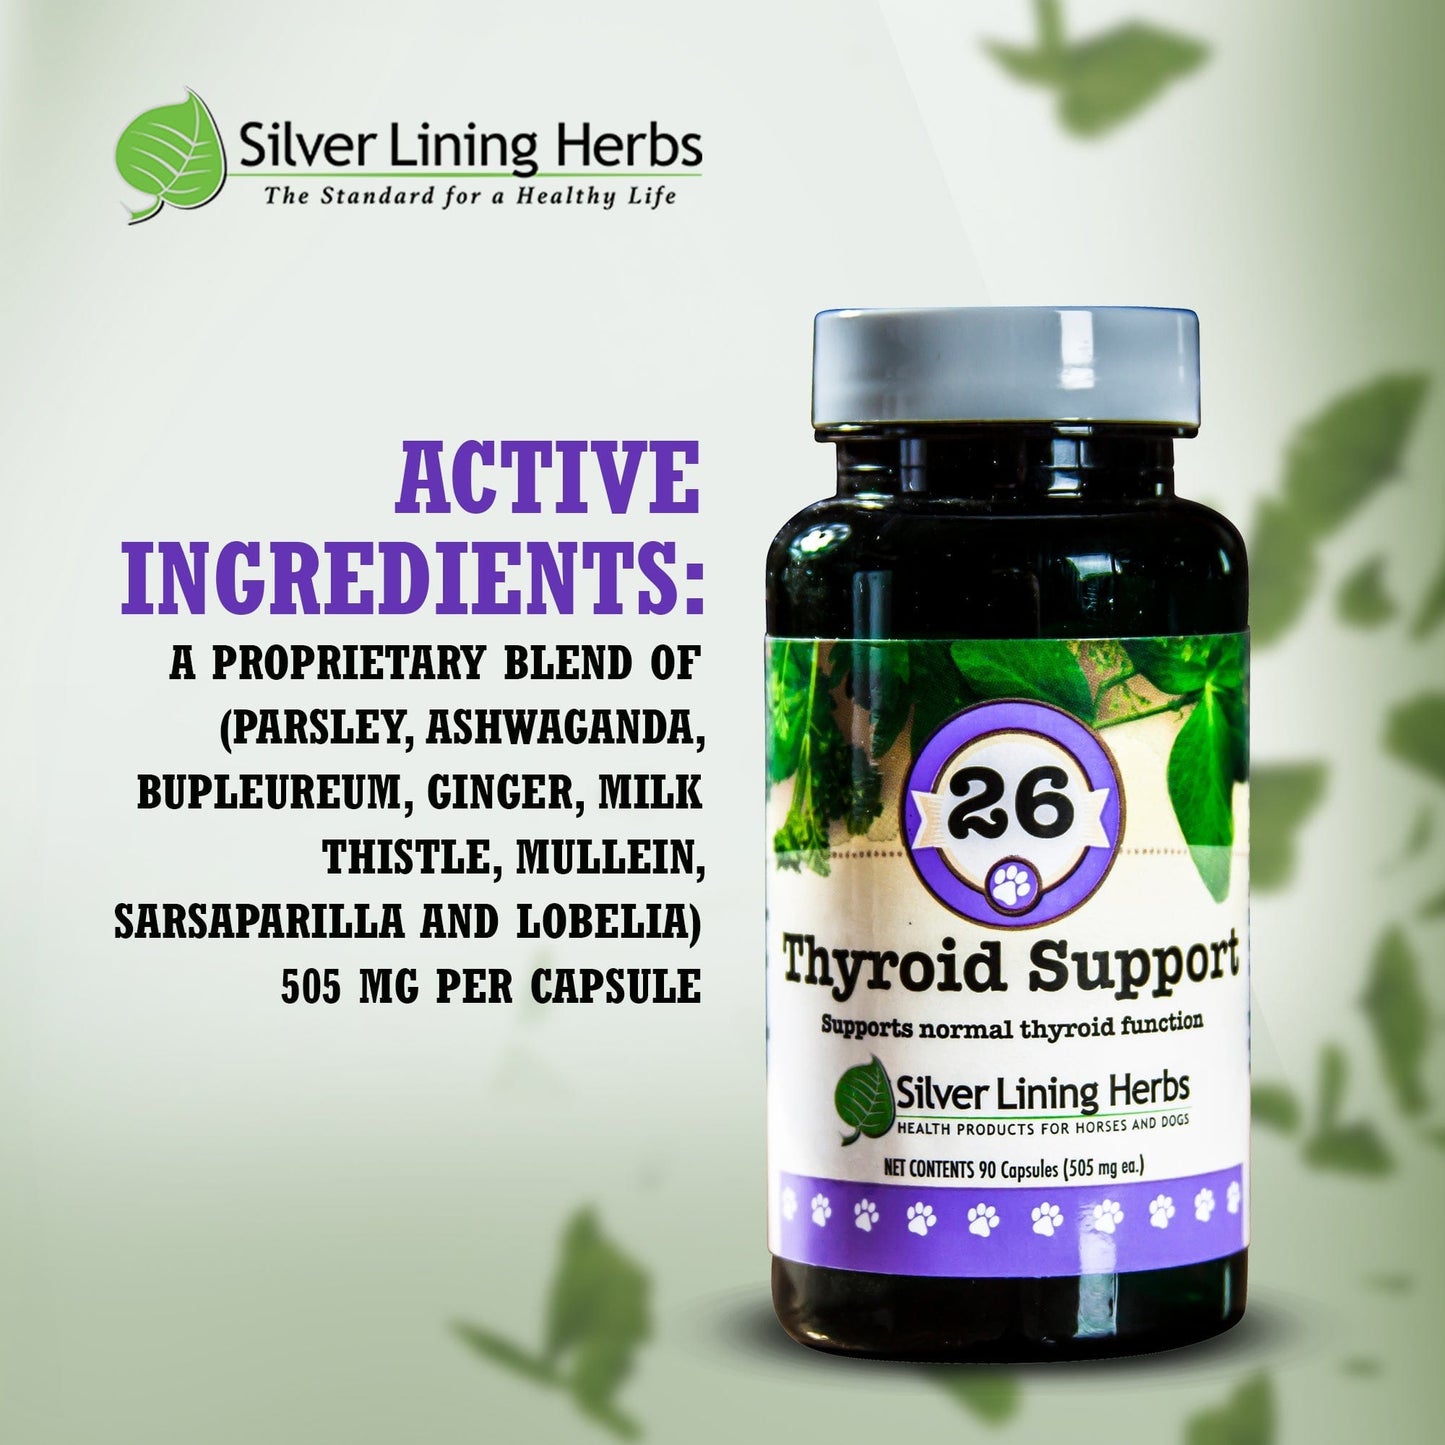 A bottle of #26 Thyroid Support for Dogs with a list of active ingredients